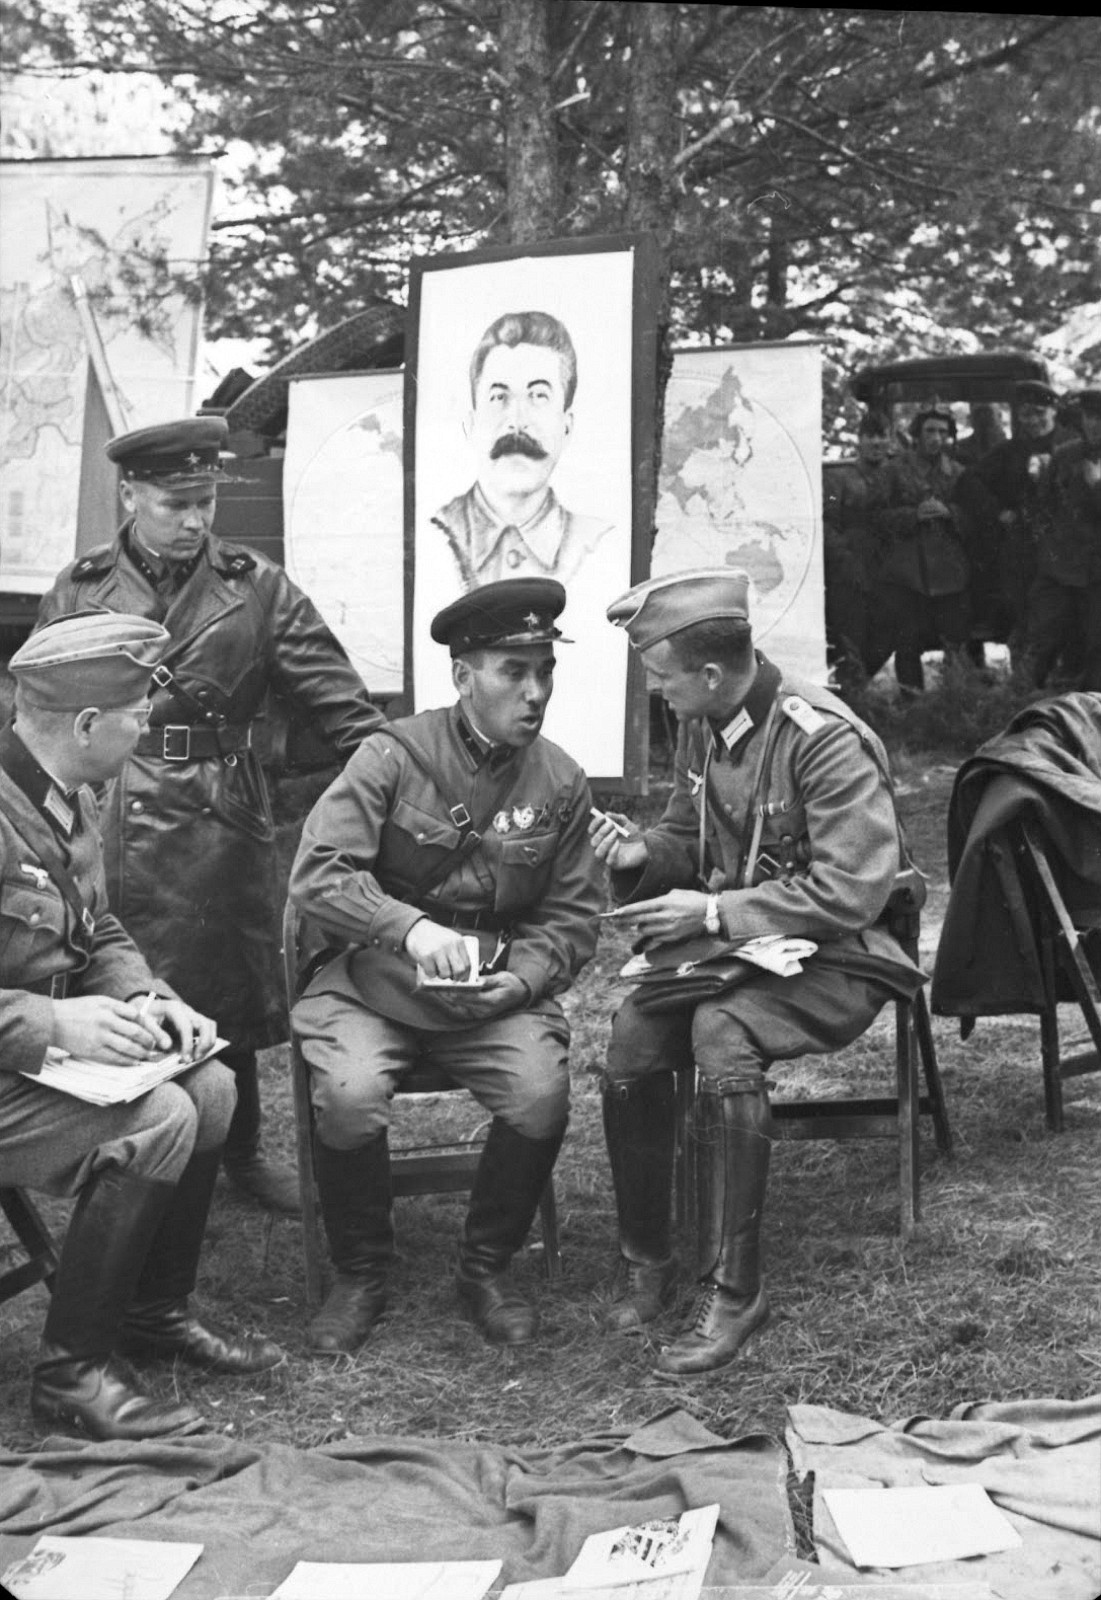 German officers visiting the Soviet military in Brest, Sept. 22, 1939 and hosted by brigade commander Semion Krivosheyin (center). Next to him his deputy major Semion Maltsev